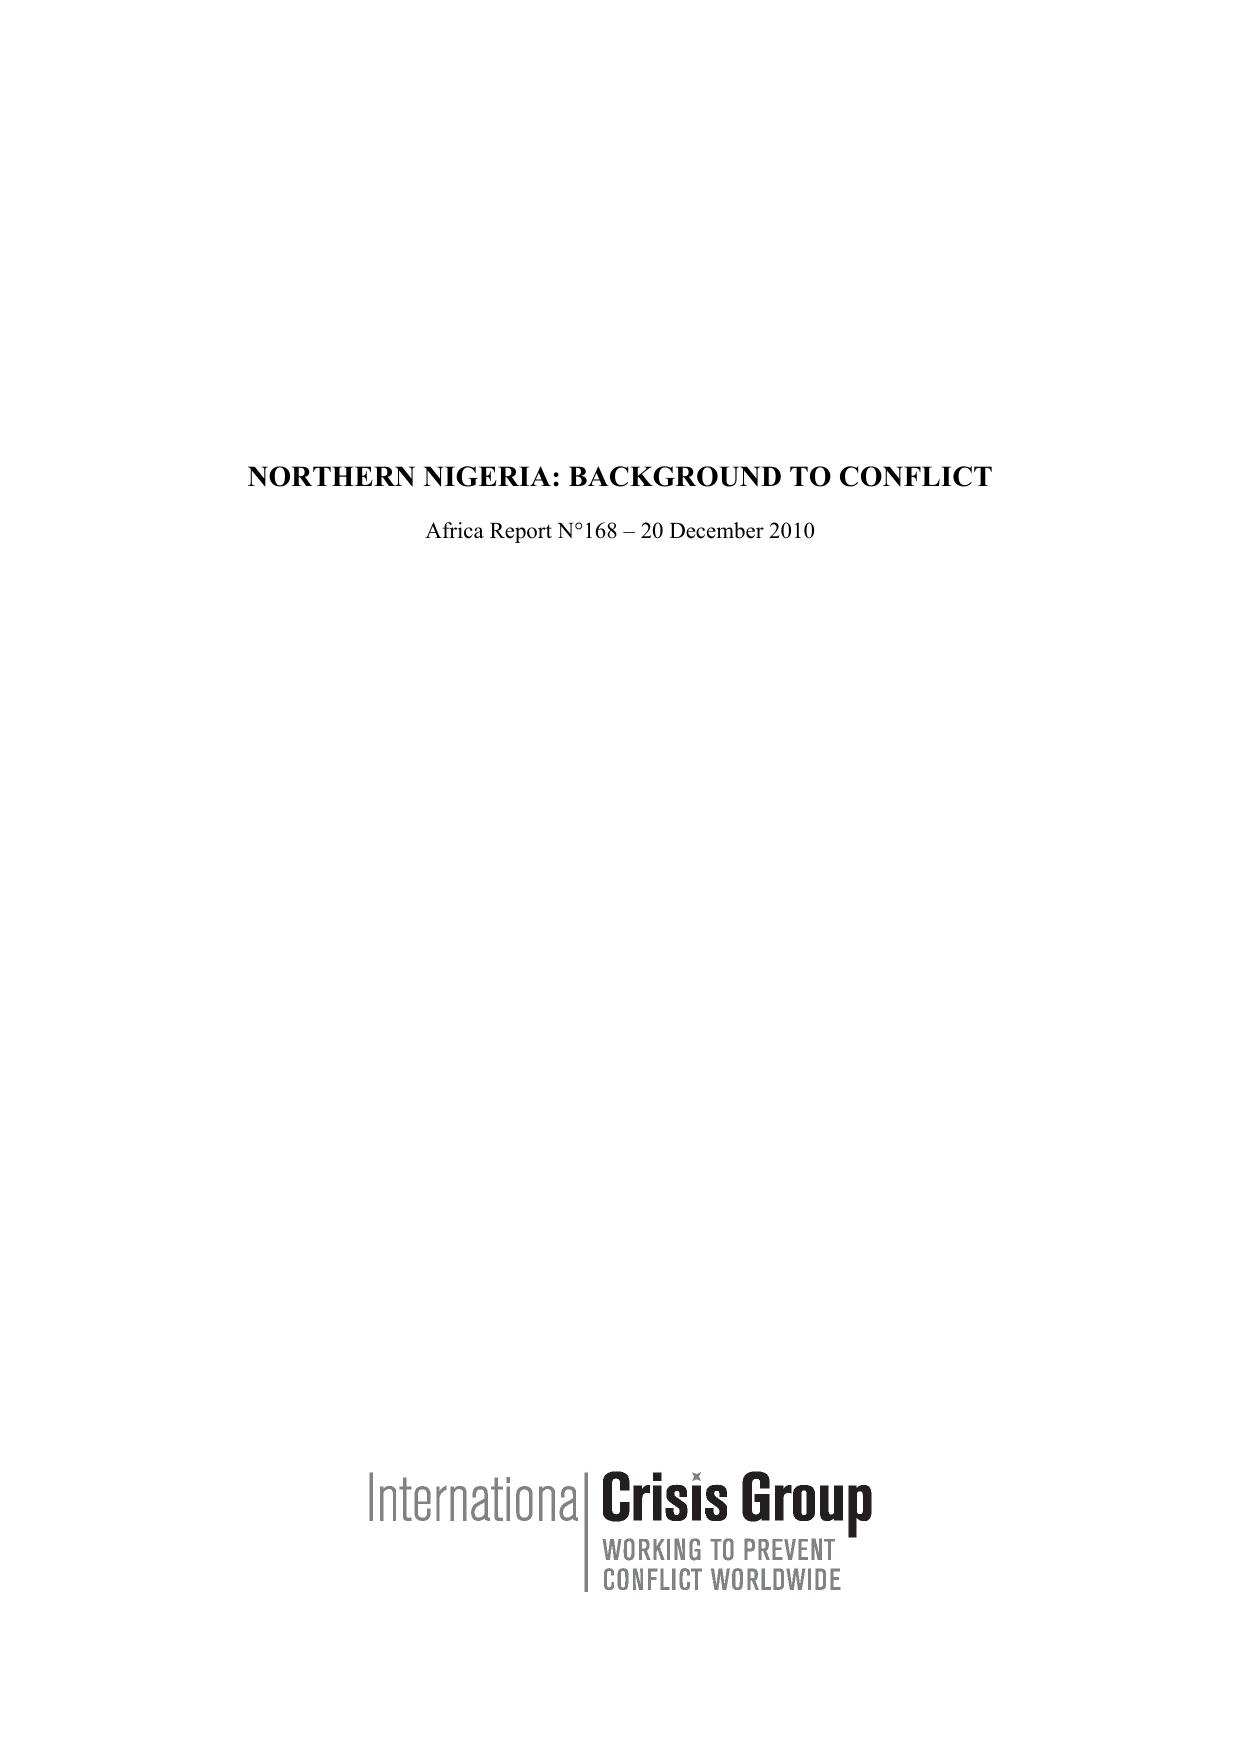 Microsoft Word - 168 Northern Nigeria - Background to Conflict